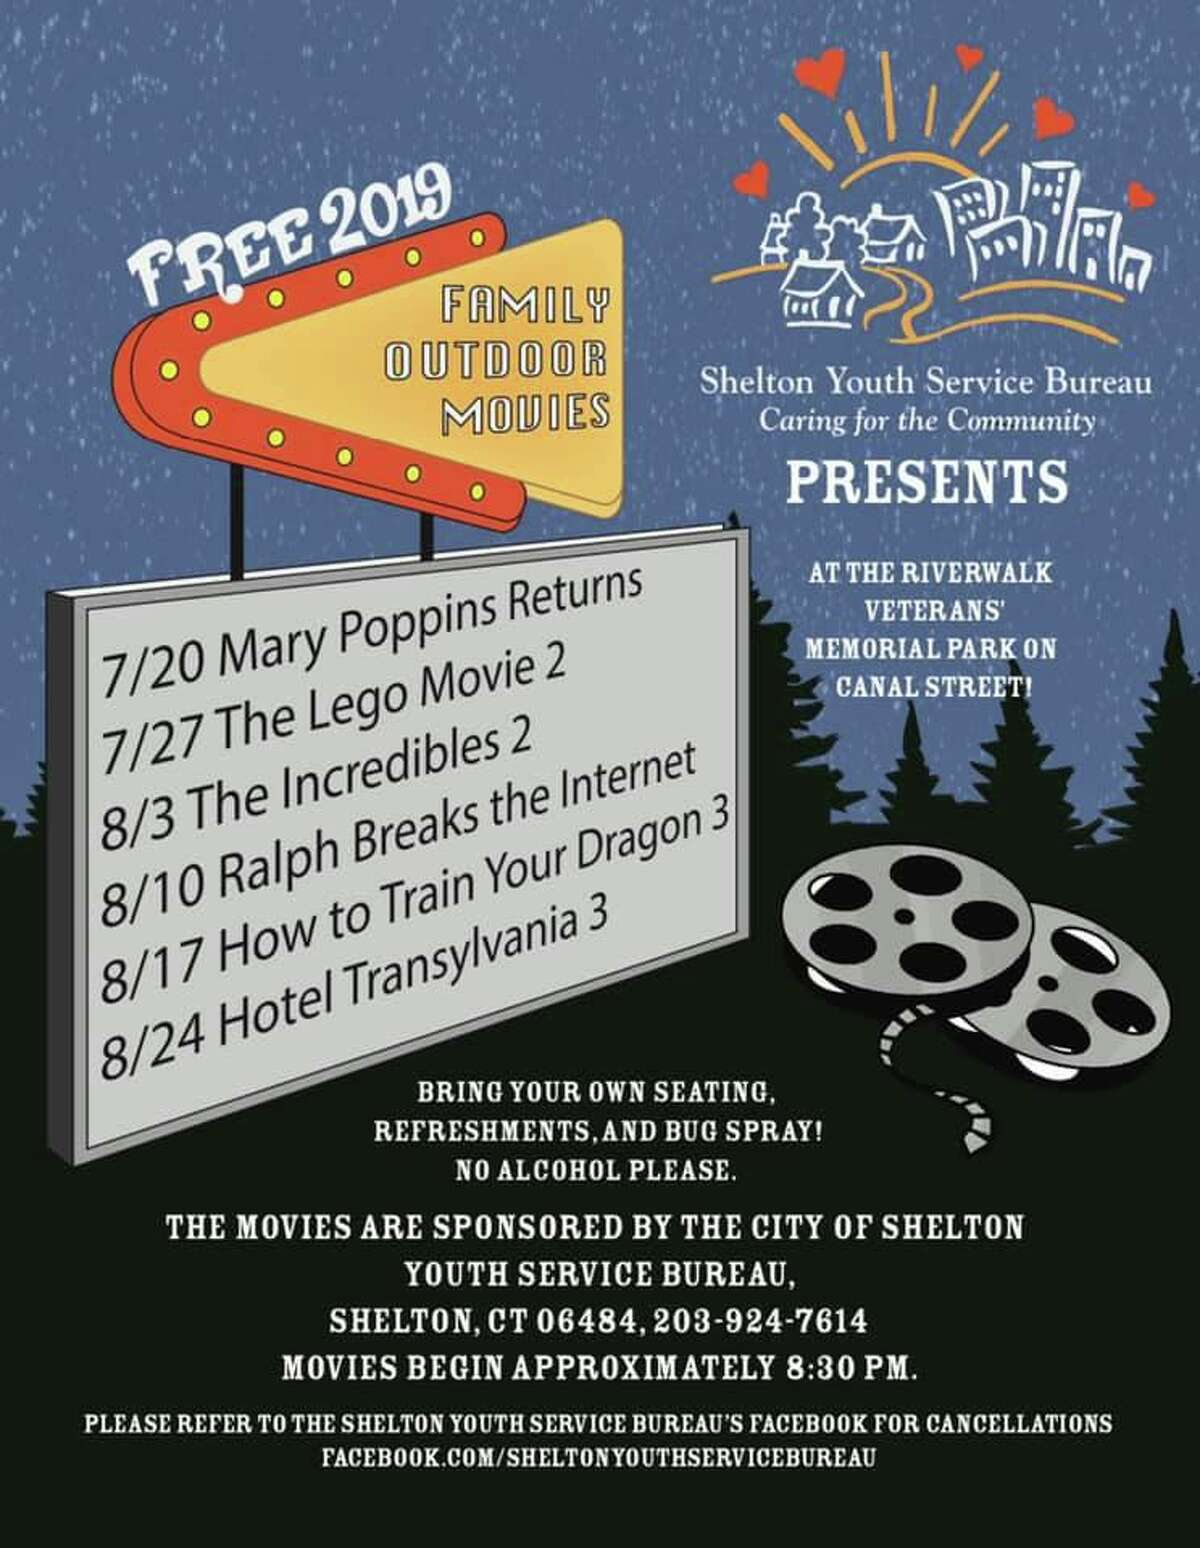 Shelton Youth Services Bureau is sponsoring the outdoor movie series.